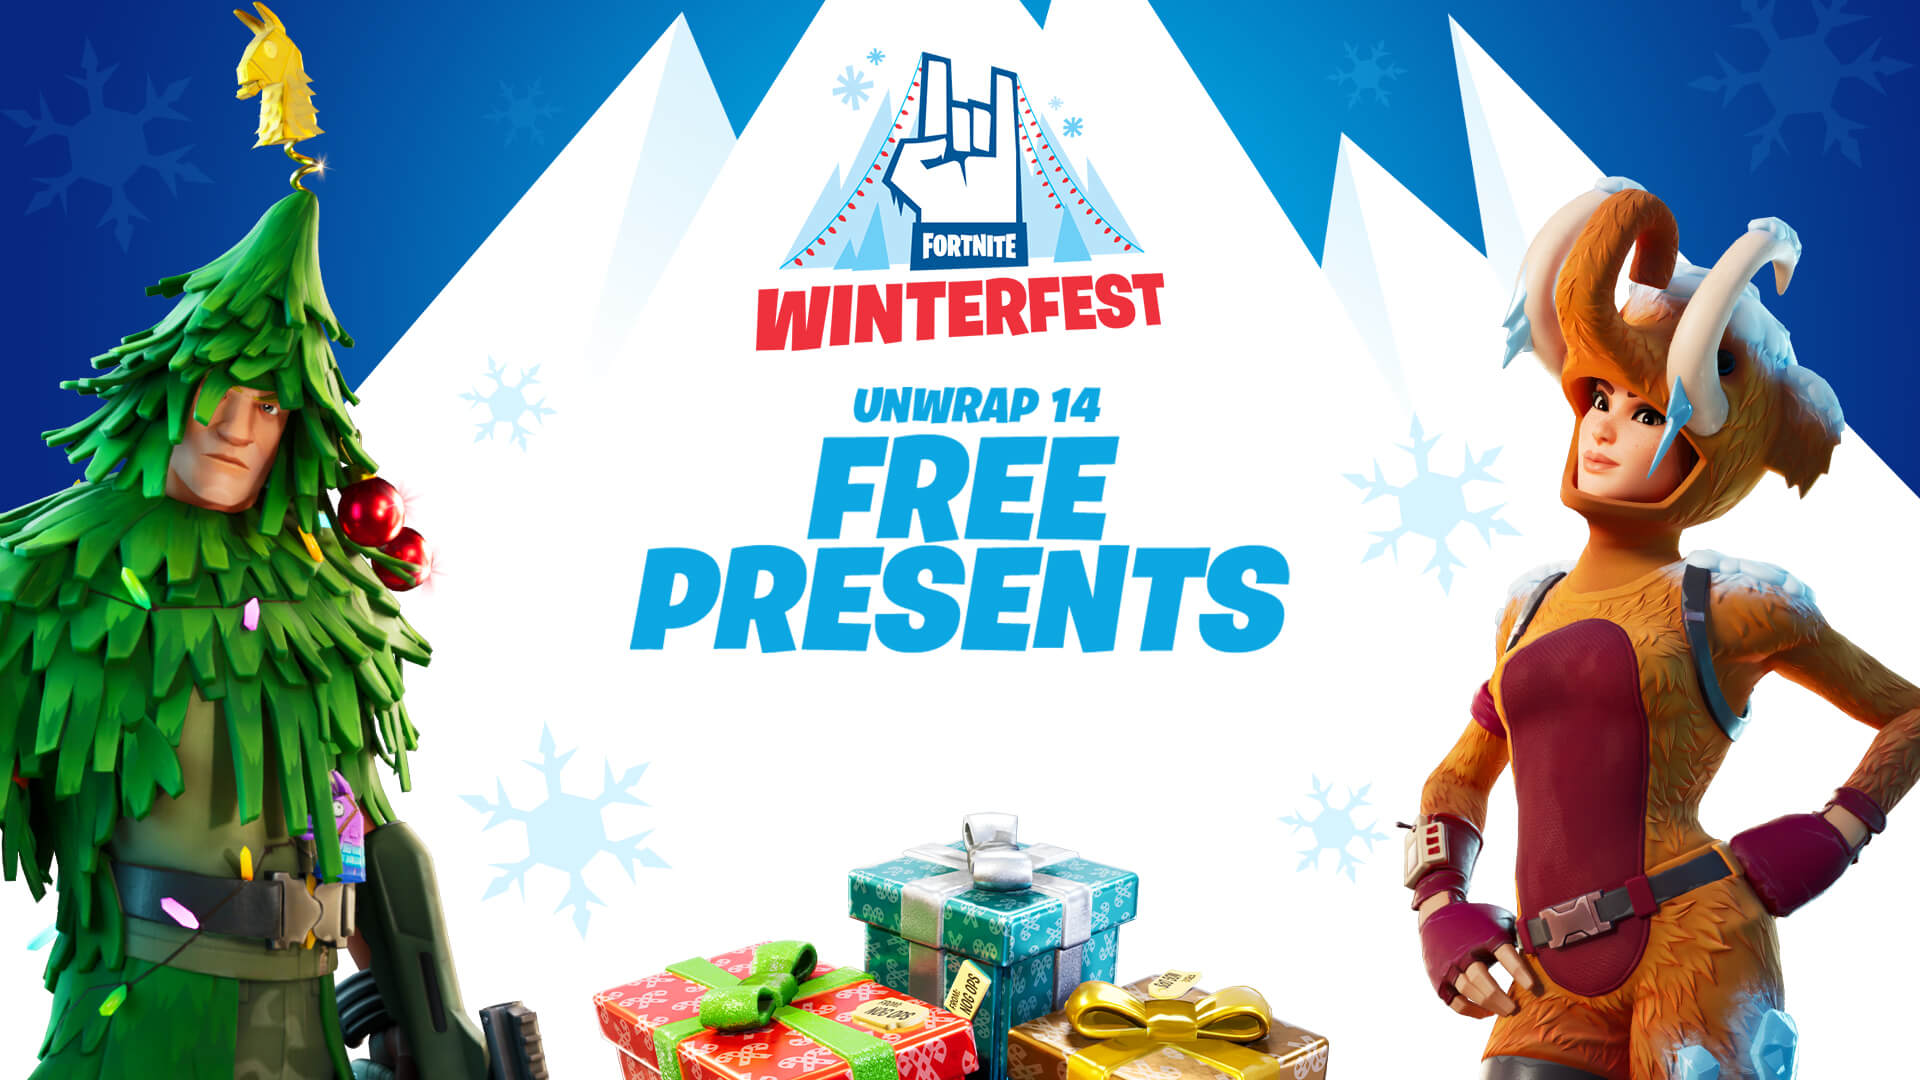 Fortnite Winterfest Launch Trailer Takes Players to The Winter